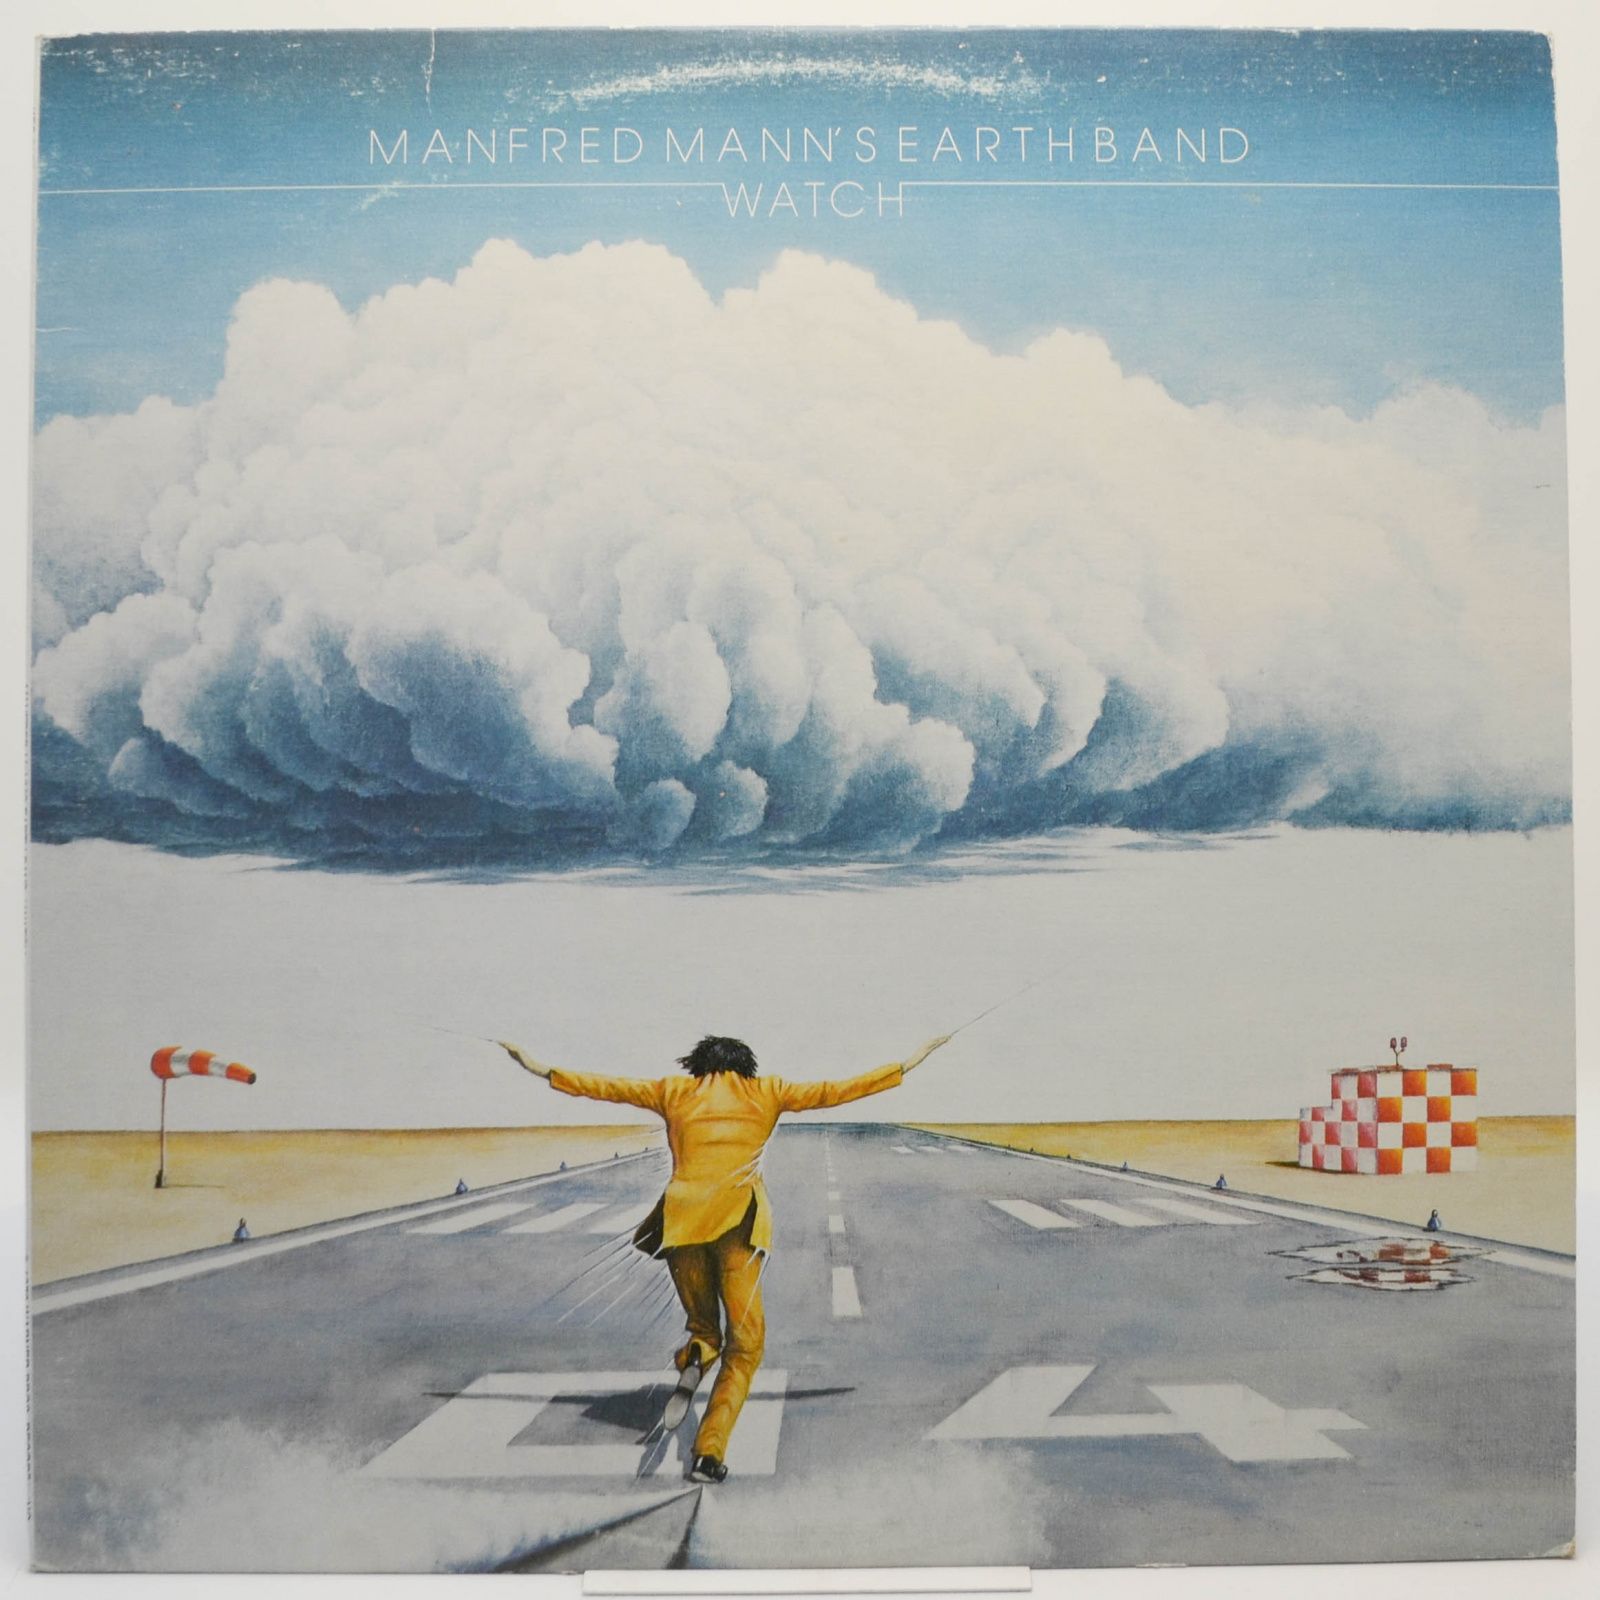 Manfred Mann's Earth Band — Watch, 1978